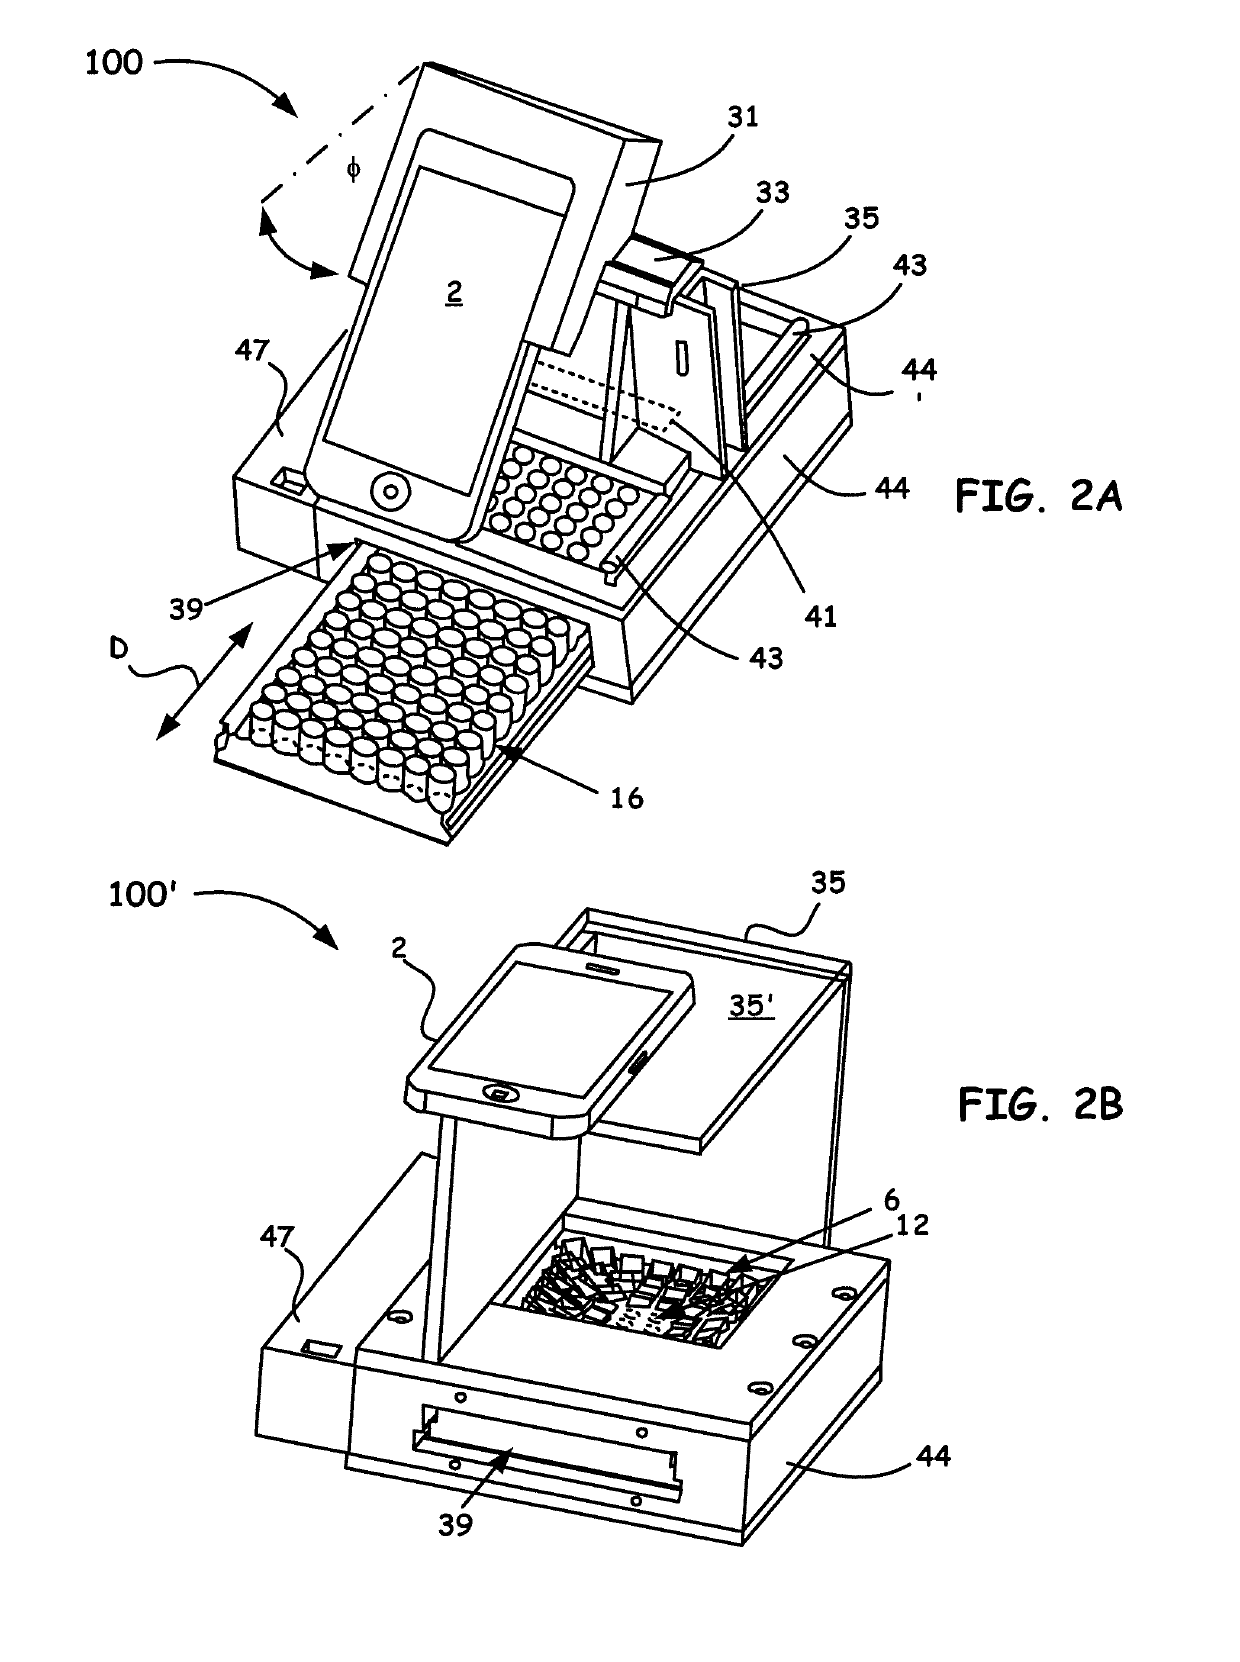 A prism array based portable microplate reader